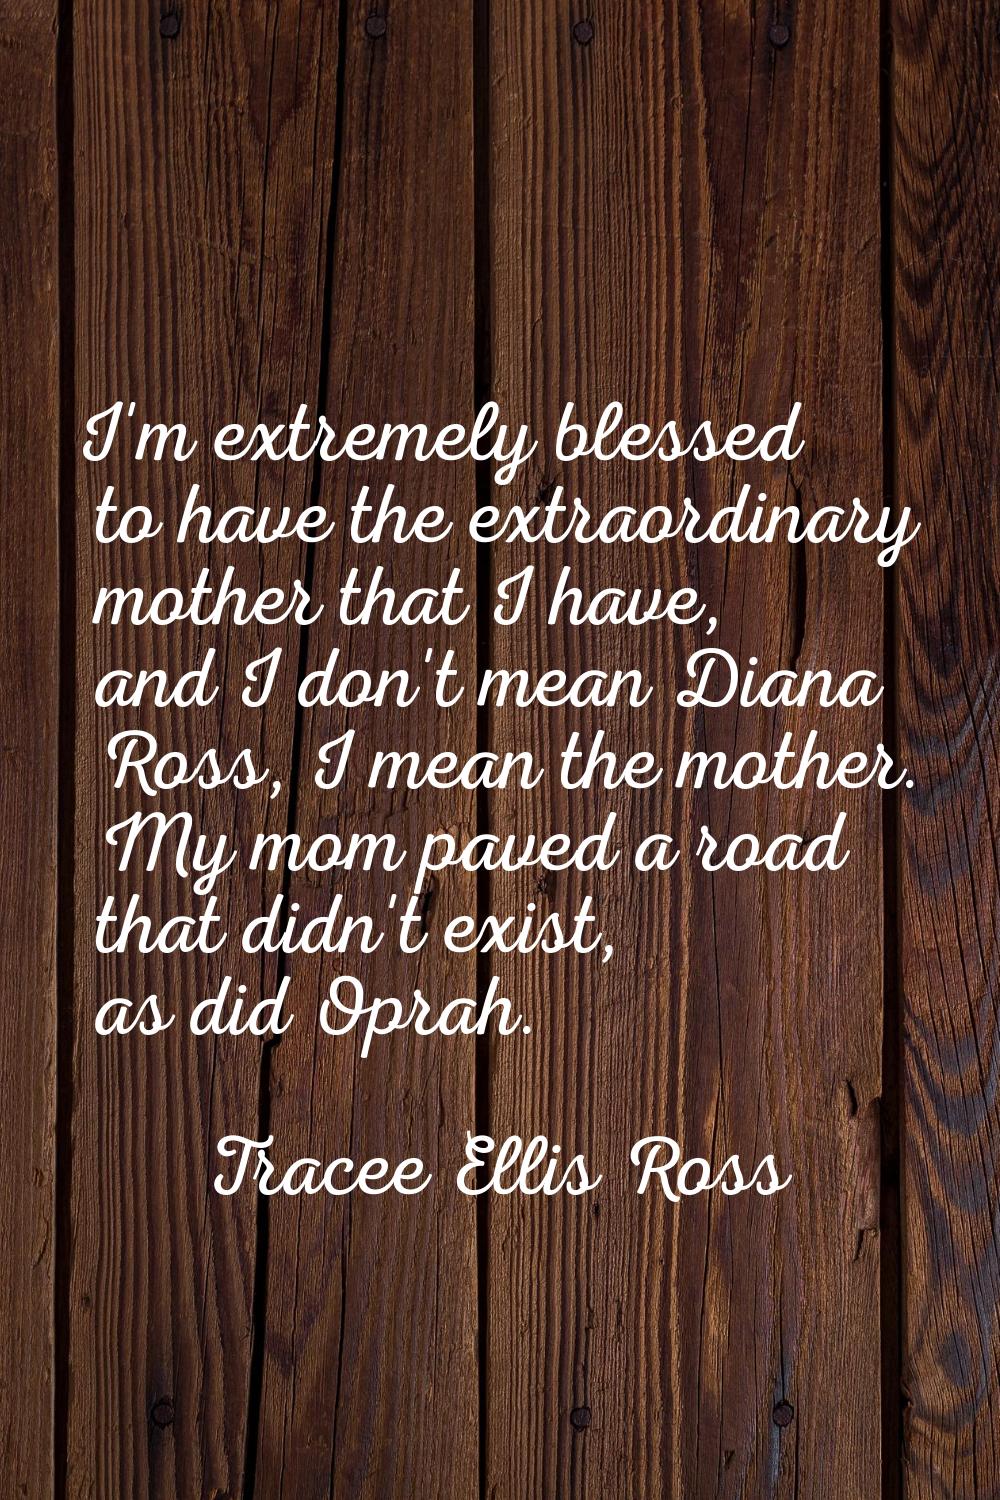 I'm extremely blessed to have the extraordinary mother that I have, and I don't mean Diana Ross, I 